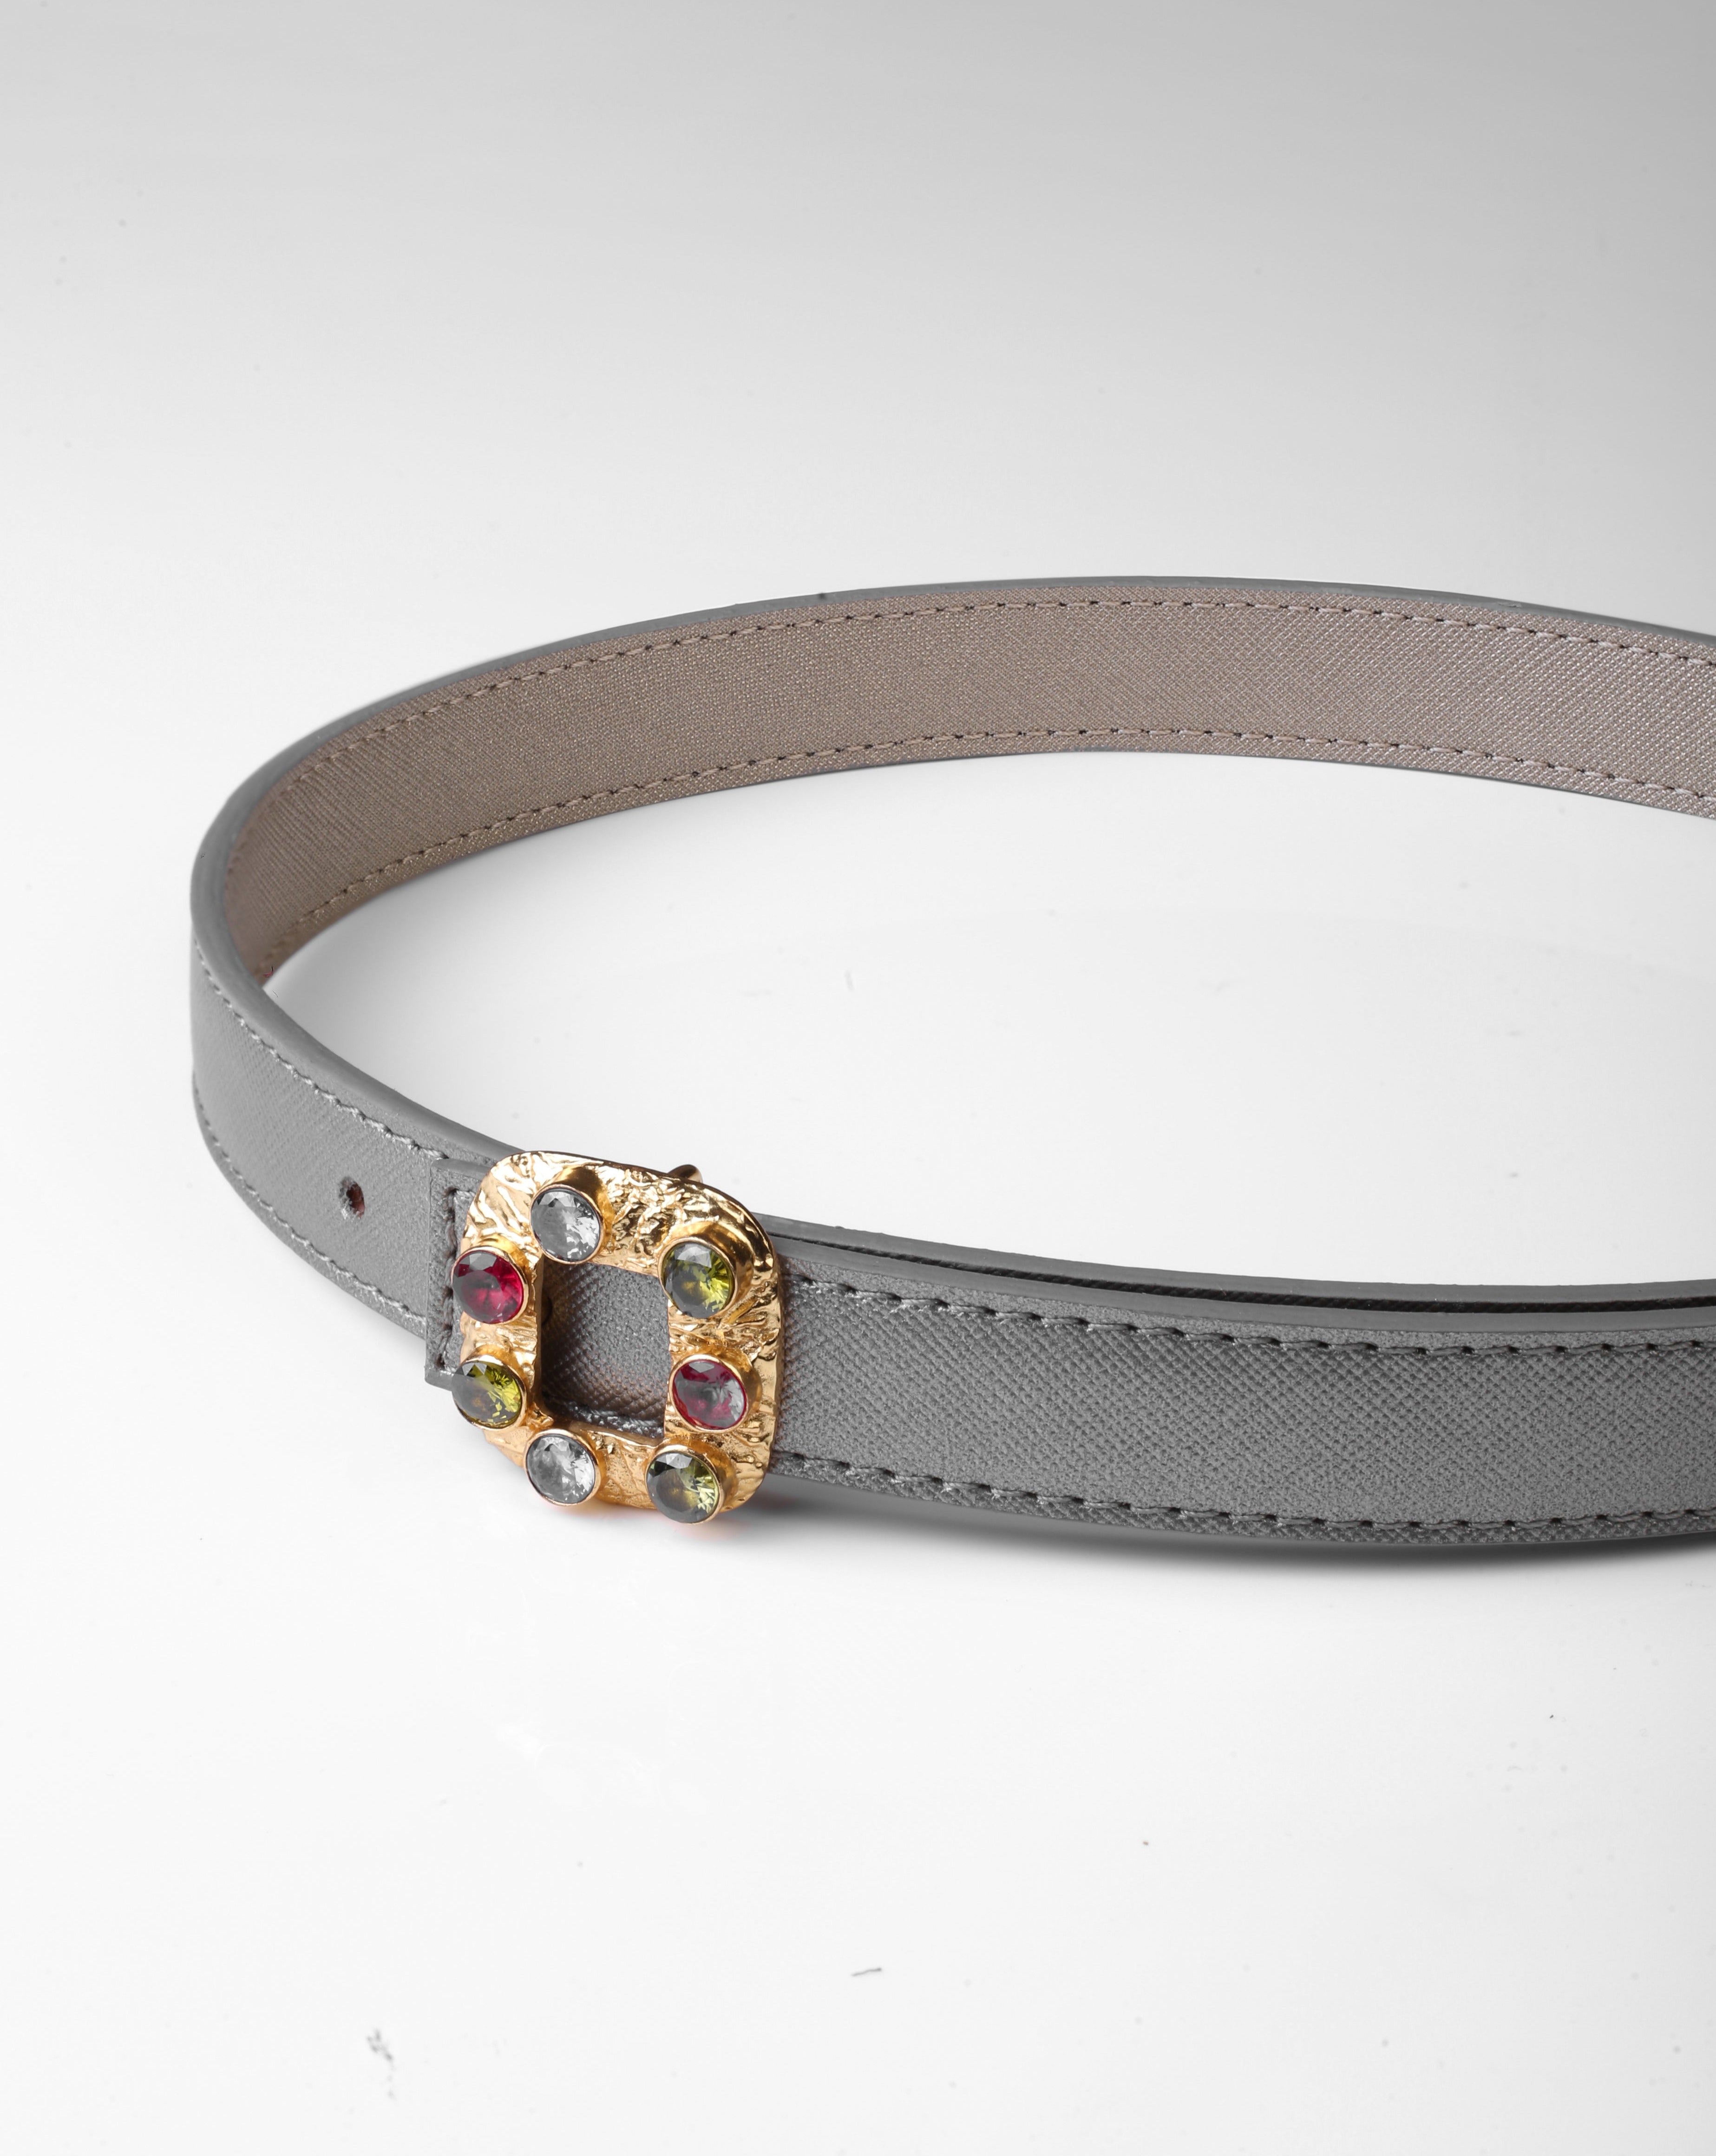 Reversible Thin Belt With Gold Square Buckle